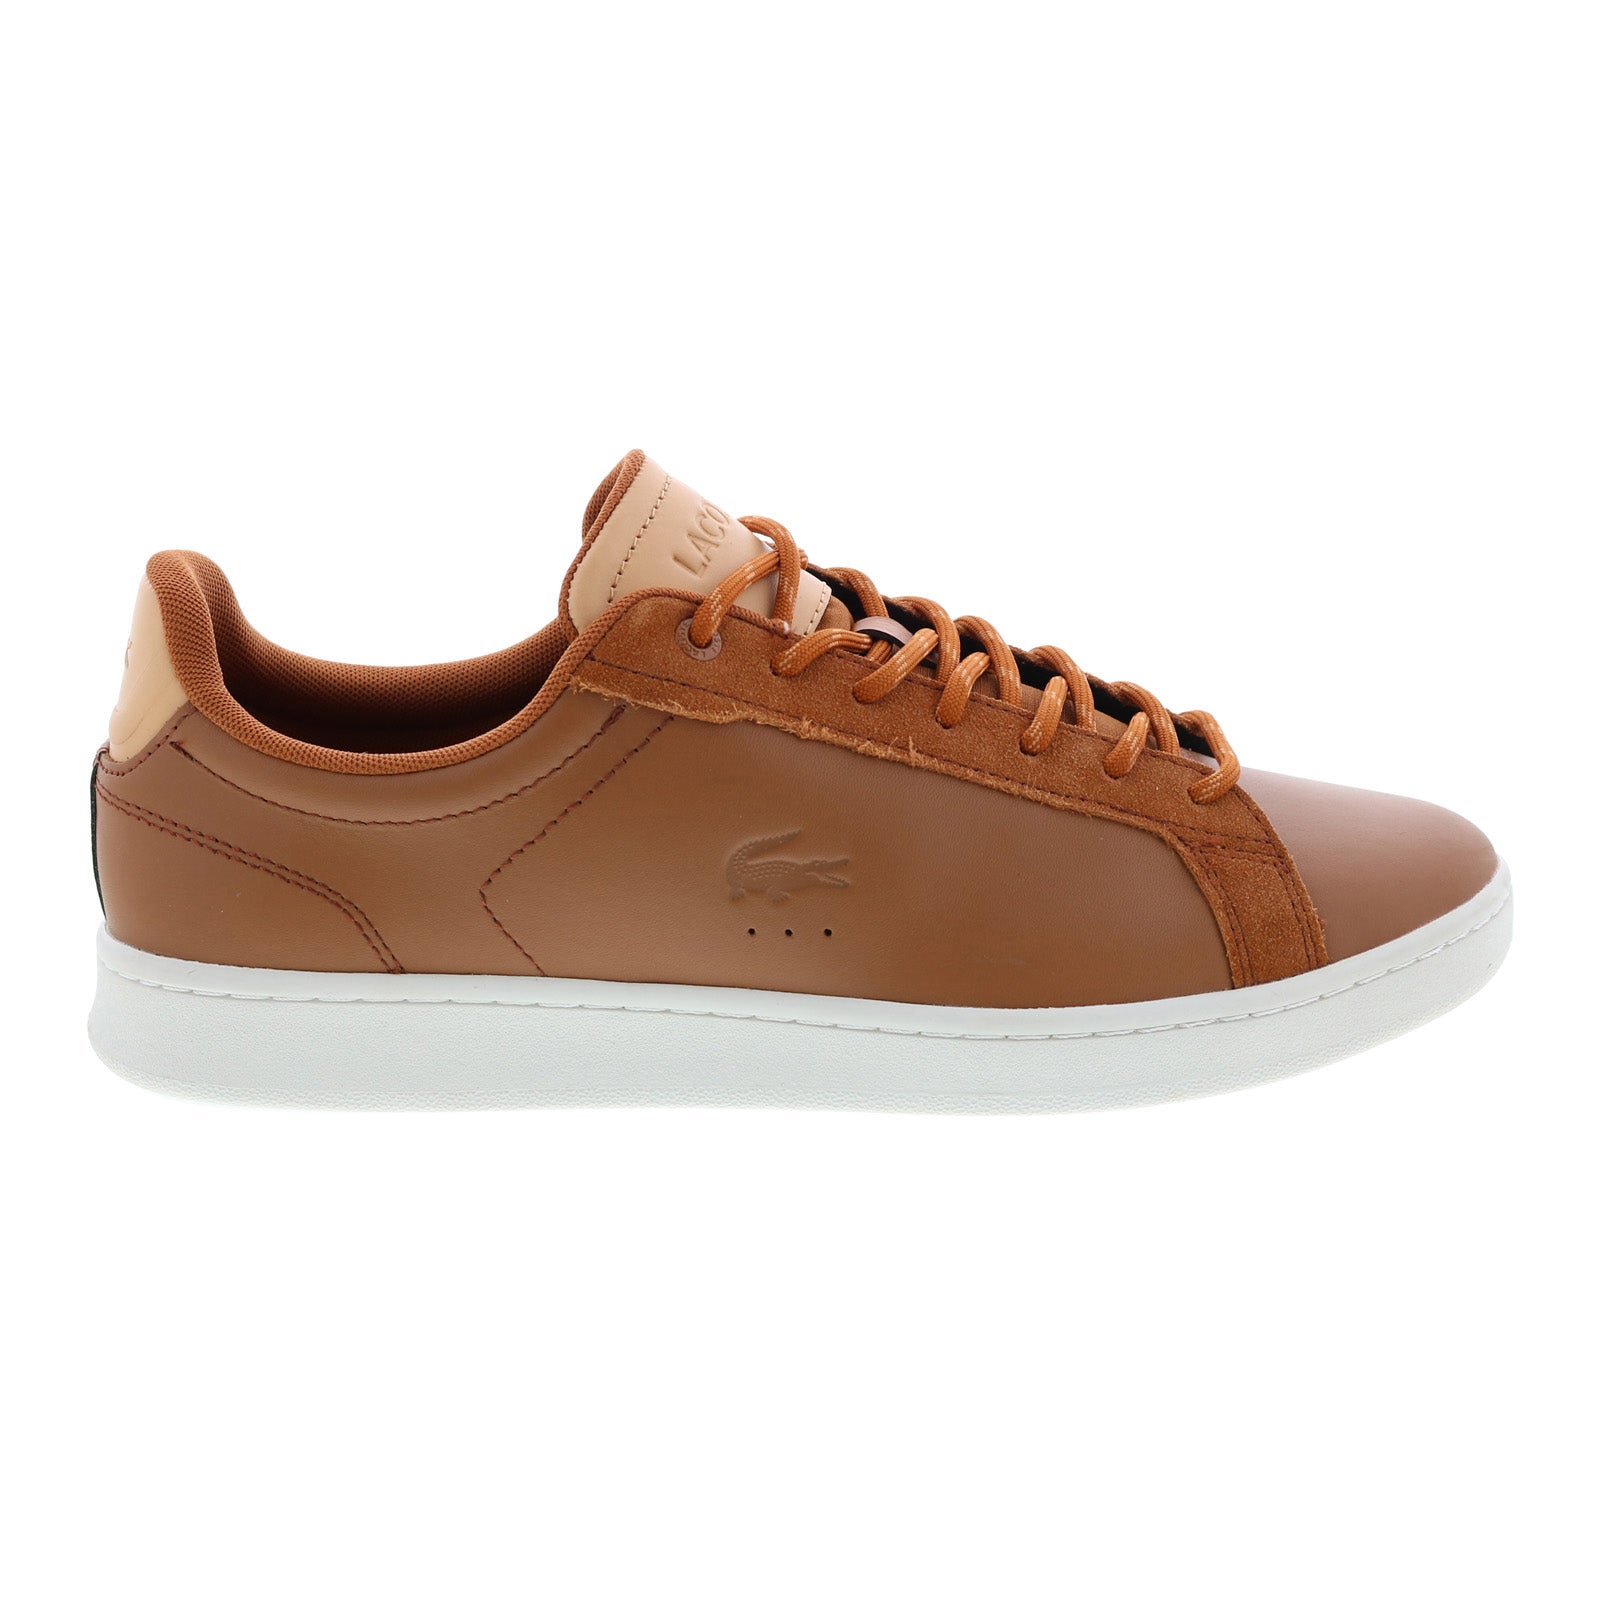 anklageren Modsigelse Blacken Lacoste Carnaby Pro 222 5 Mens Brown Leather Lifestyle Sneakers Shoes -  Ruze Shoes